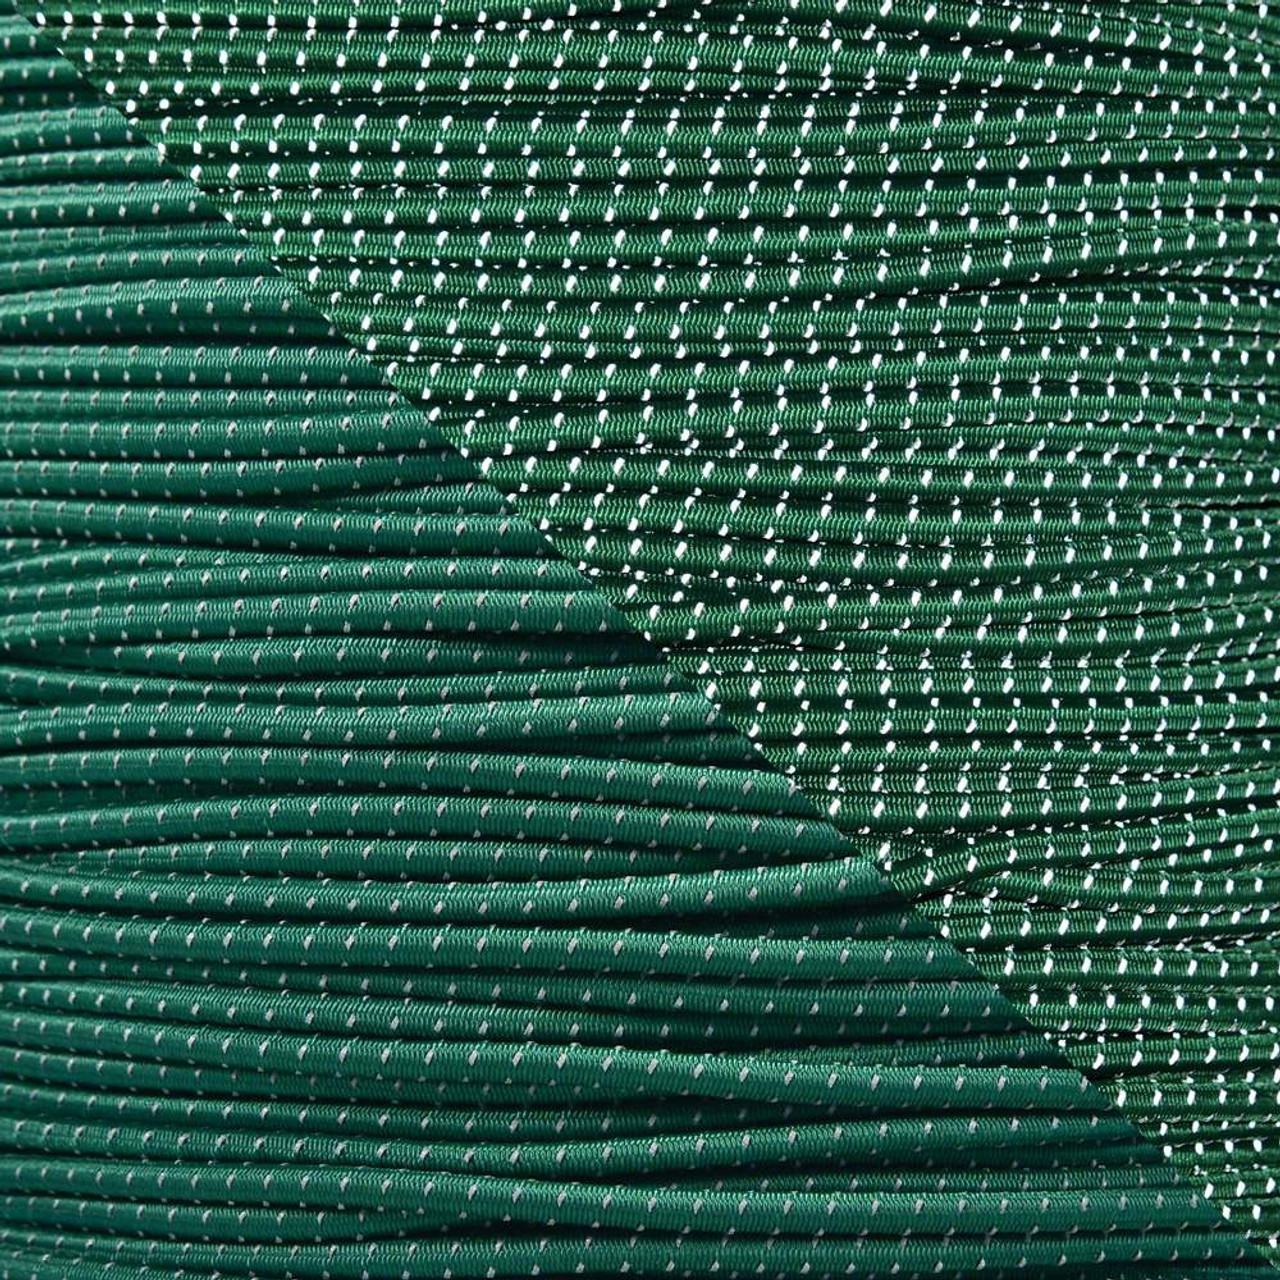 Kelly Green - 1/8 inch Shock Cord with Reflective Tracers